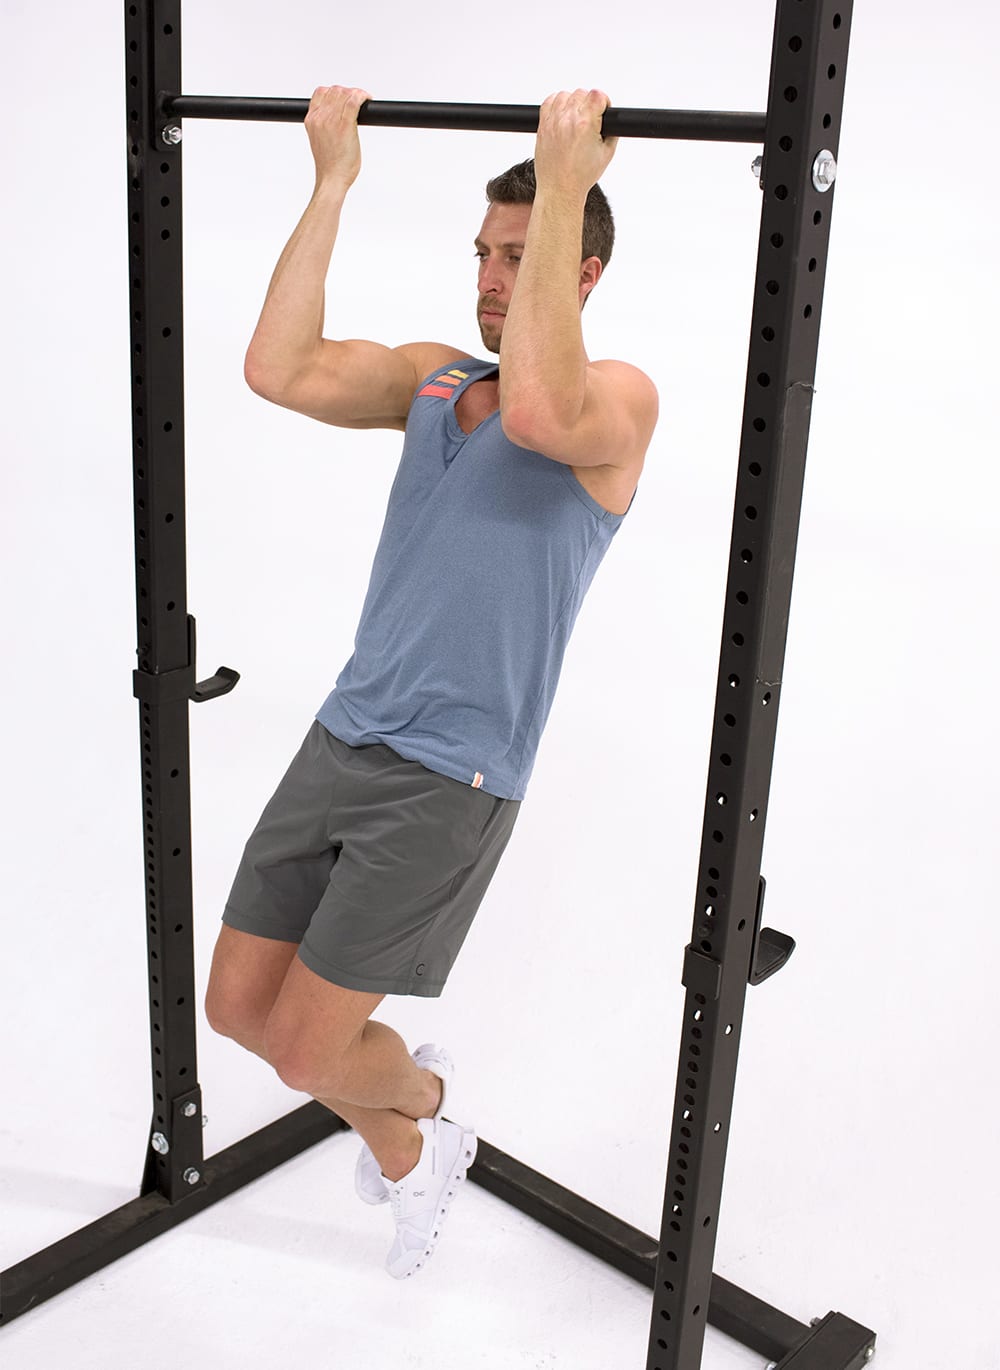 Man Does Flexed Arm Hang | Isometric Exercise